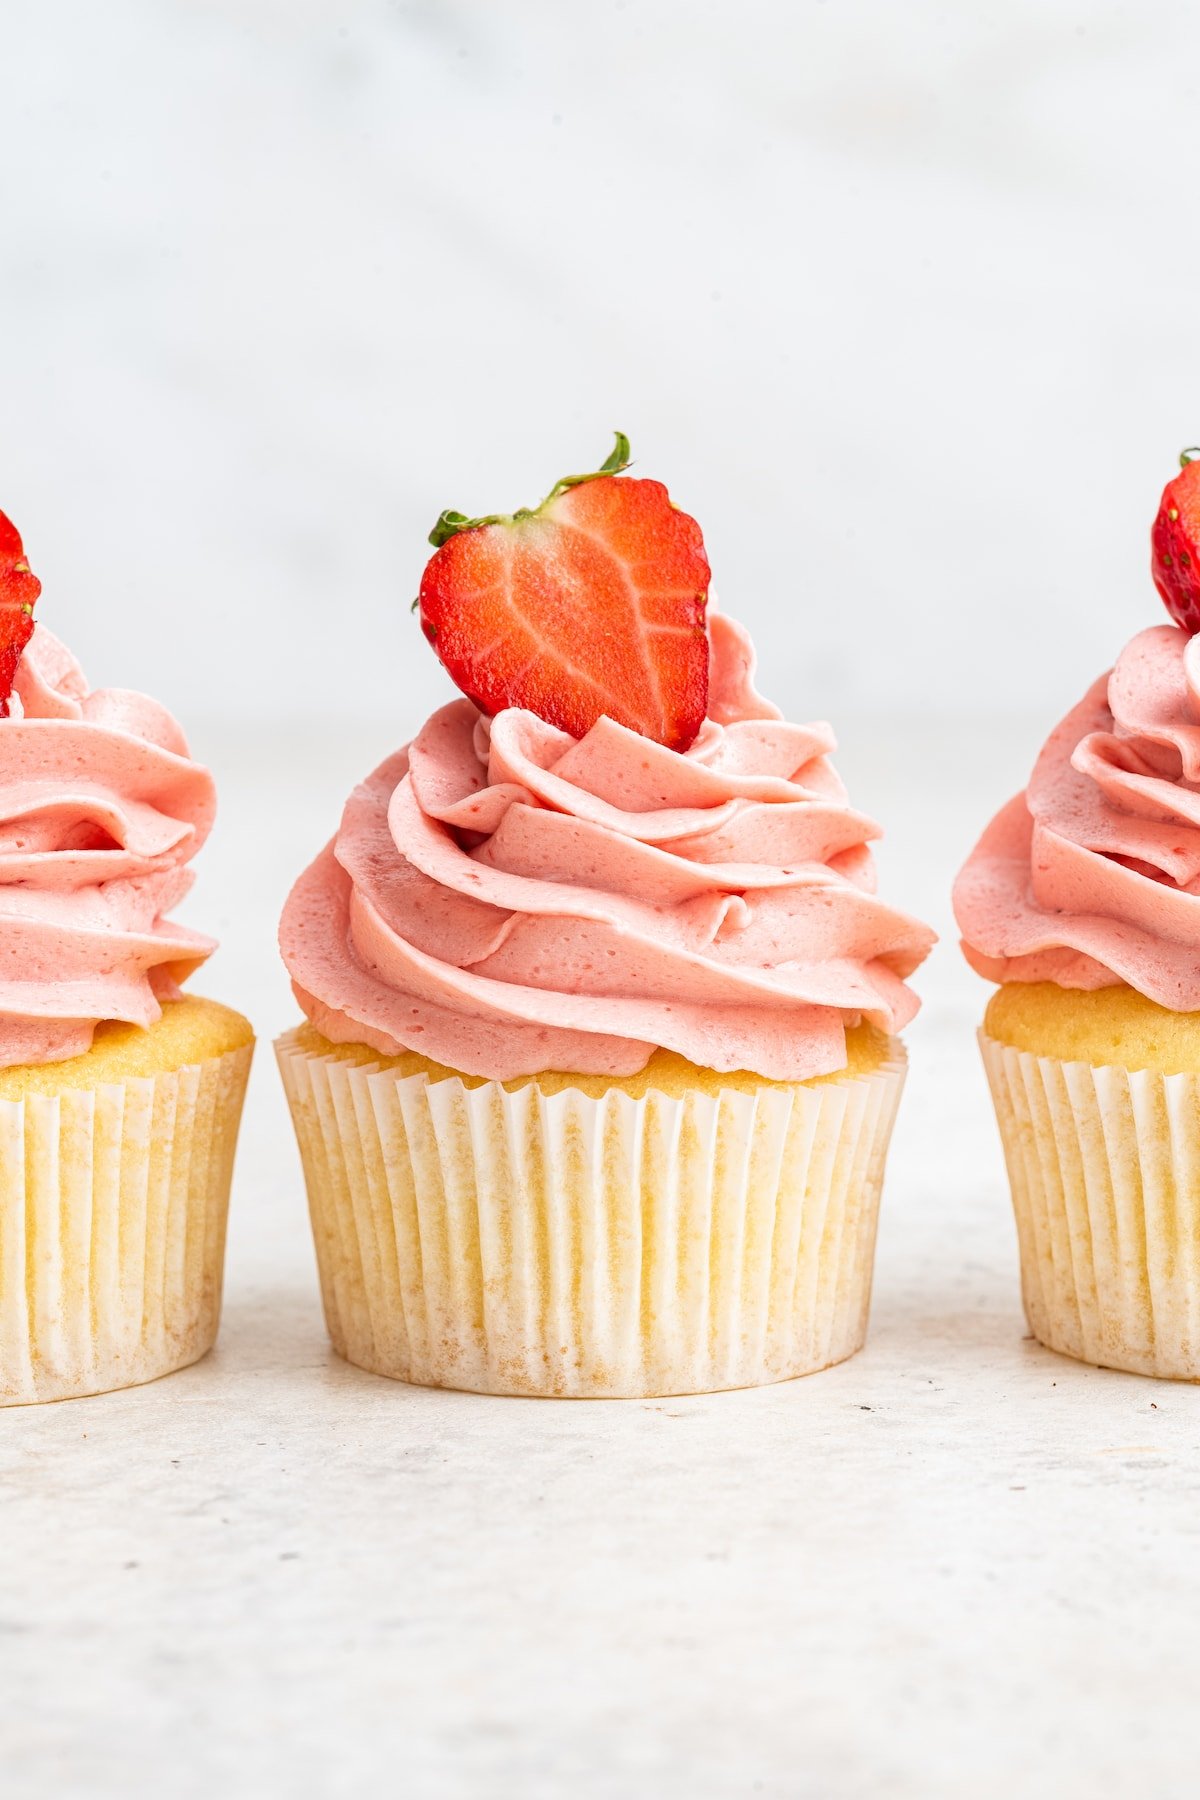 A vanilla cupcake with a pink strawberry buttercream frosting and a fresh strawberry slice on top.